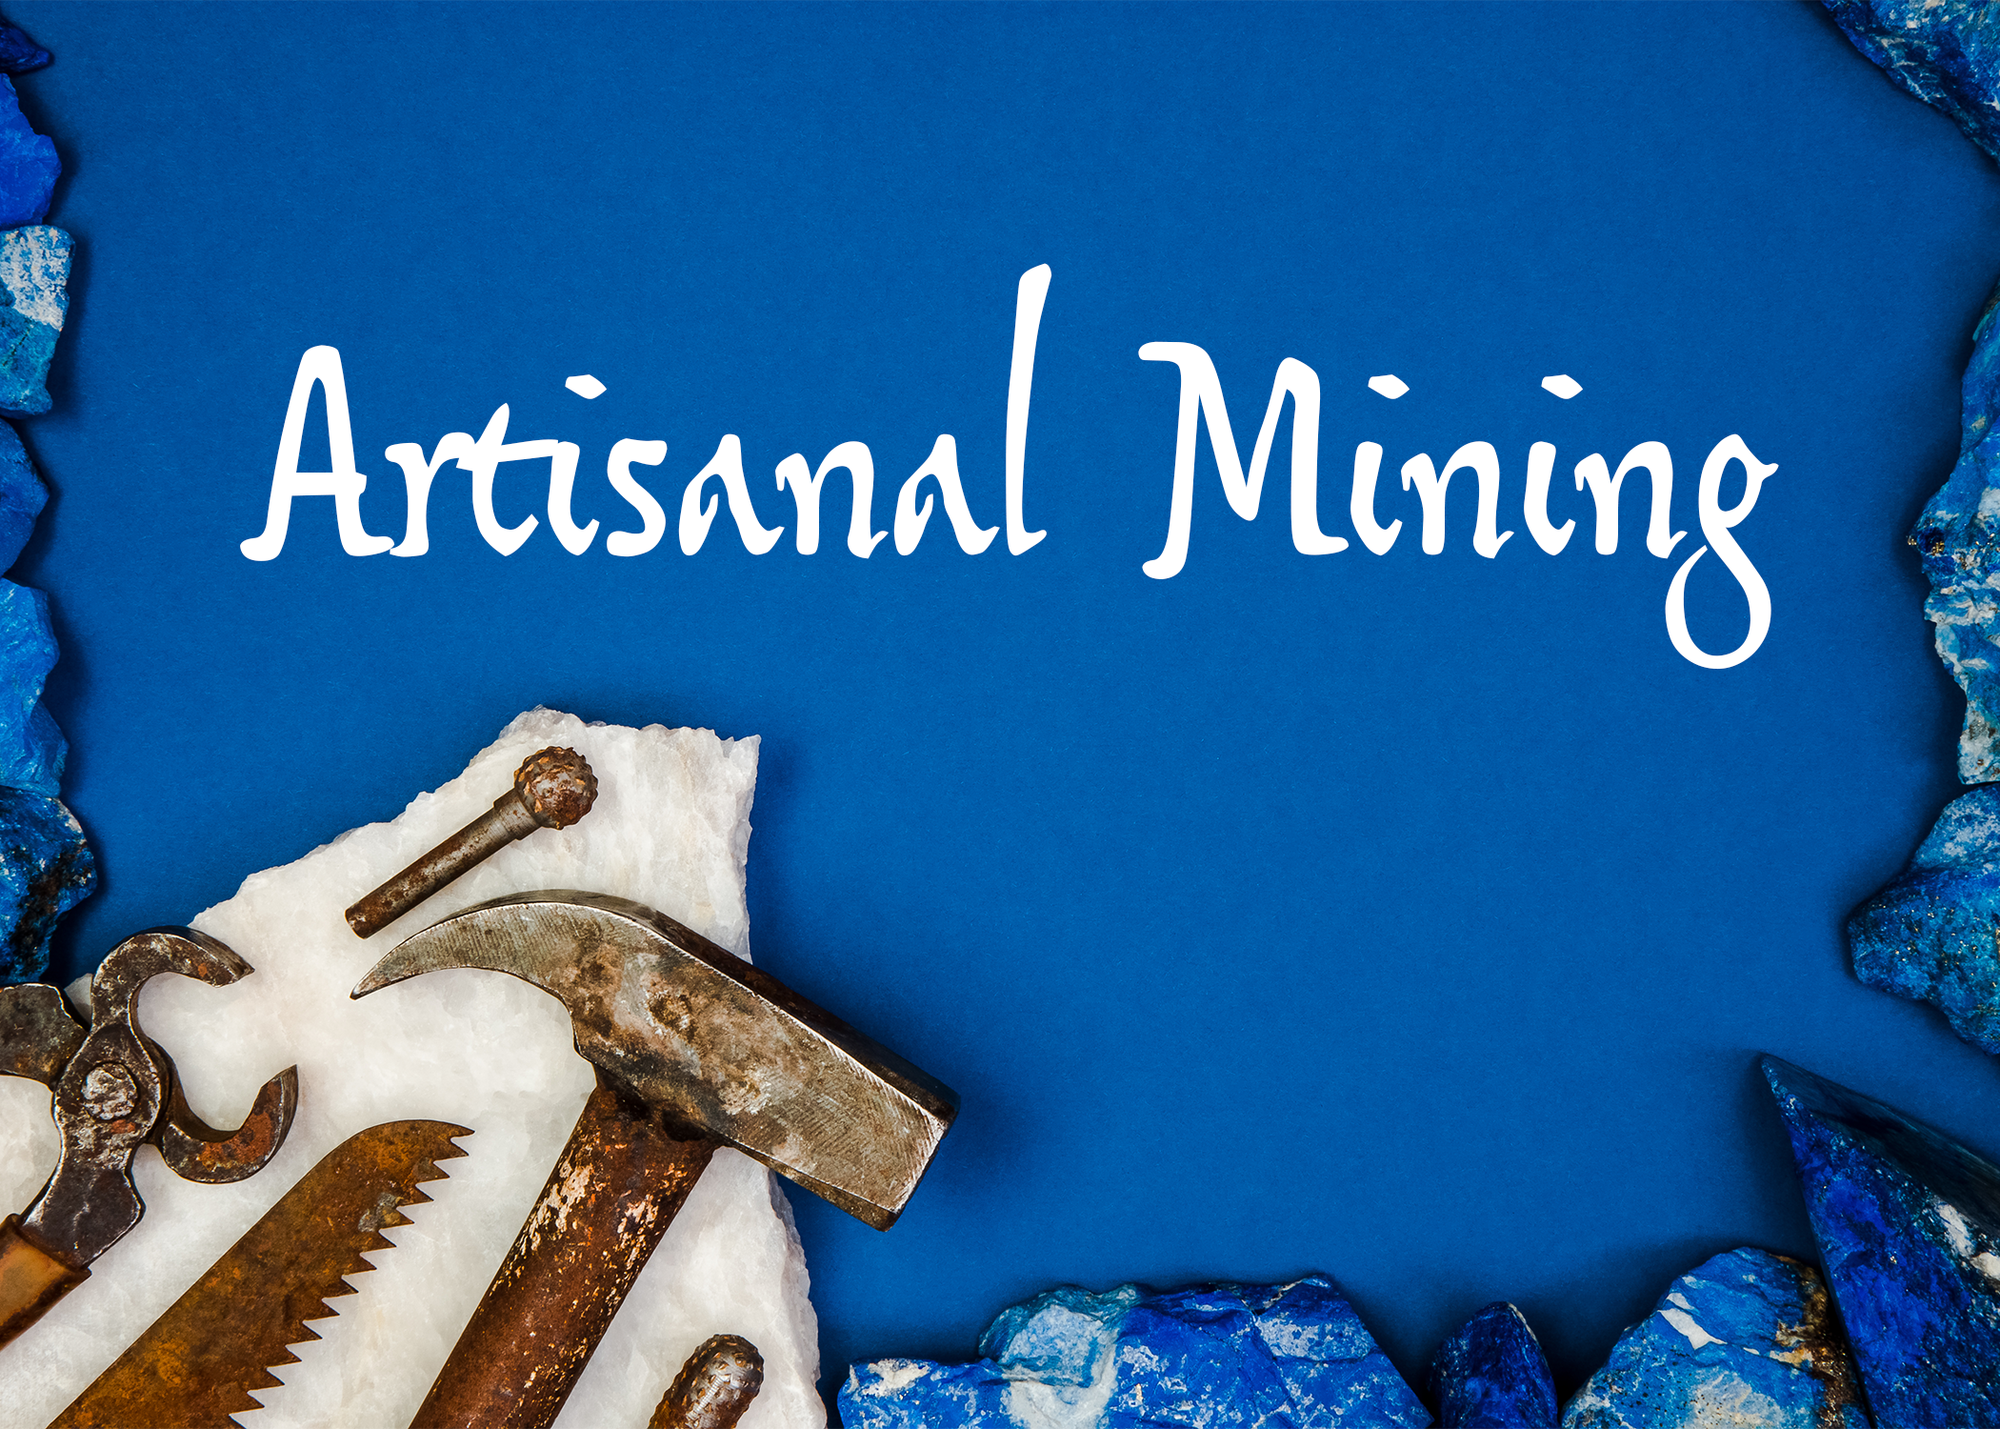 Yes, You Should Care About Artisanal Mining in Africa - Here is Why